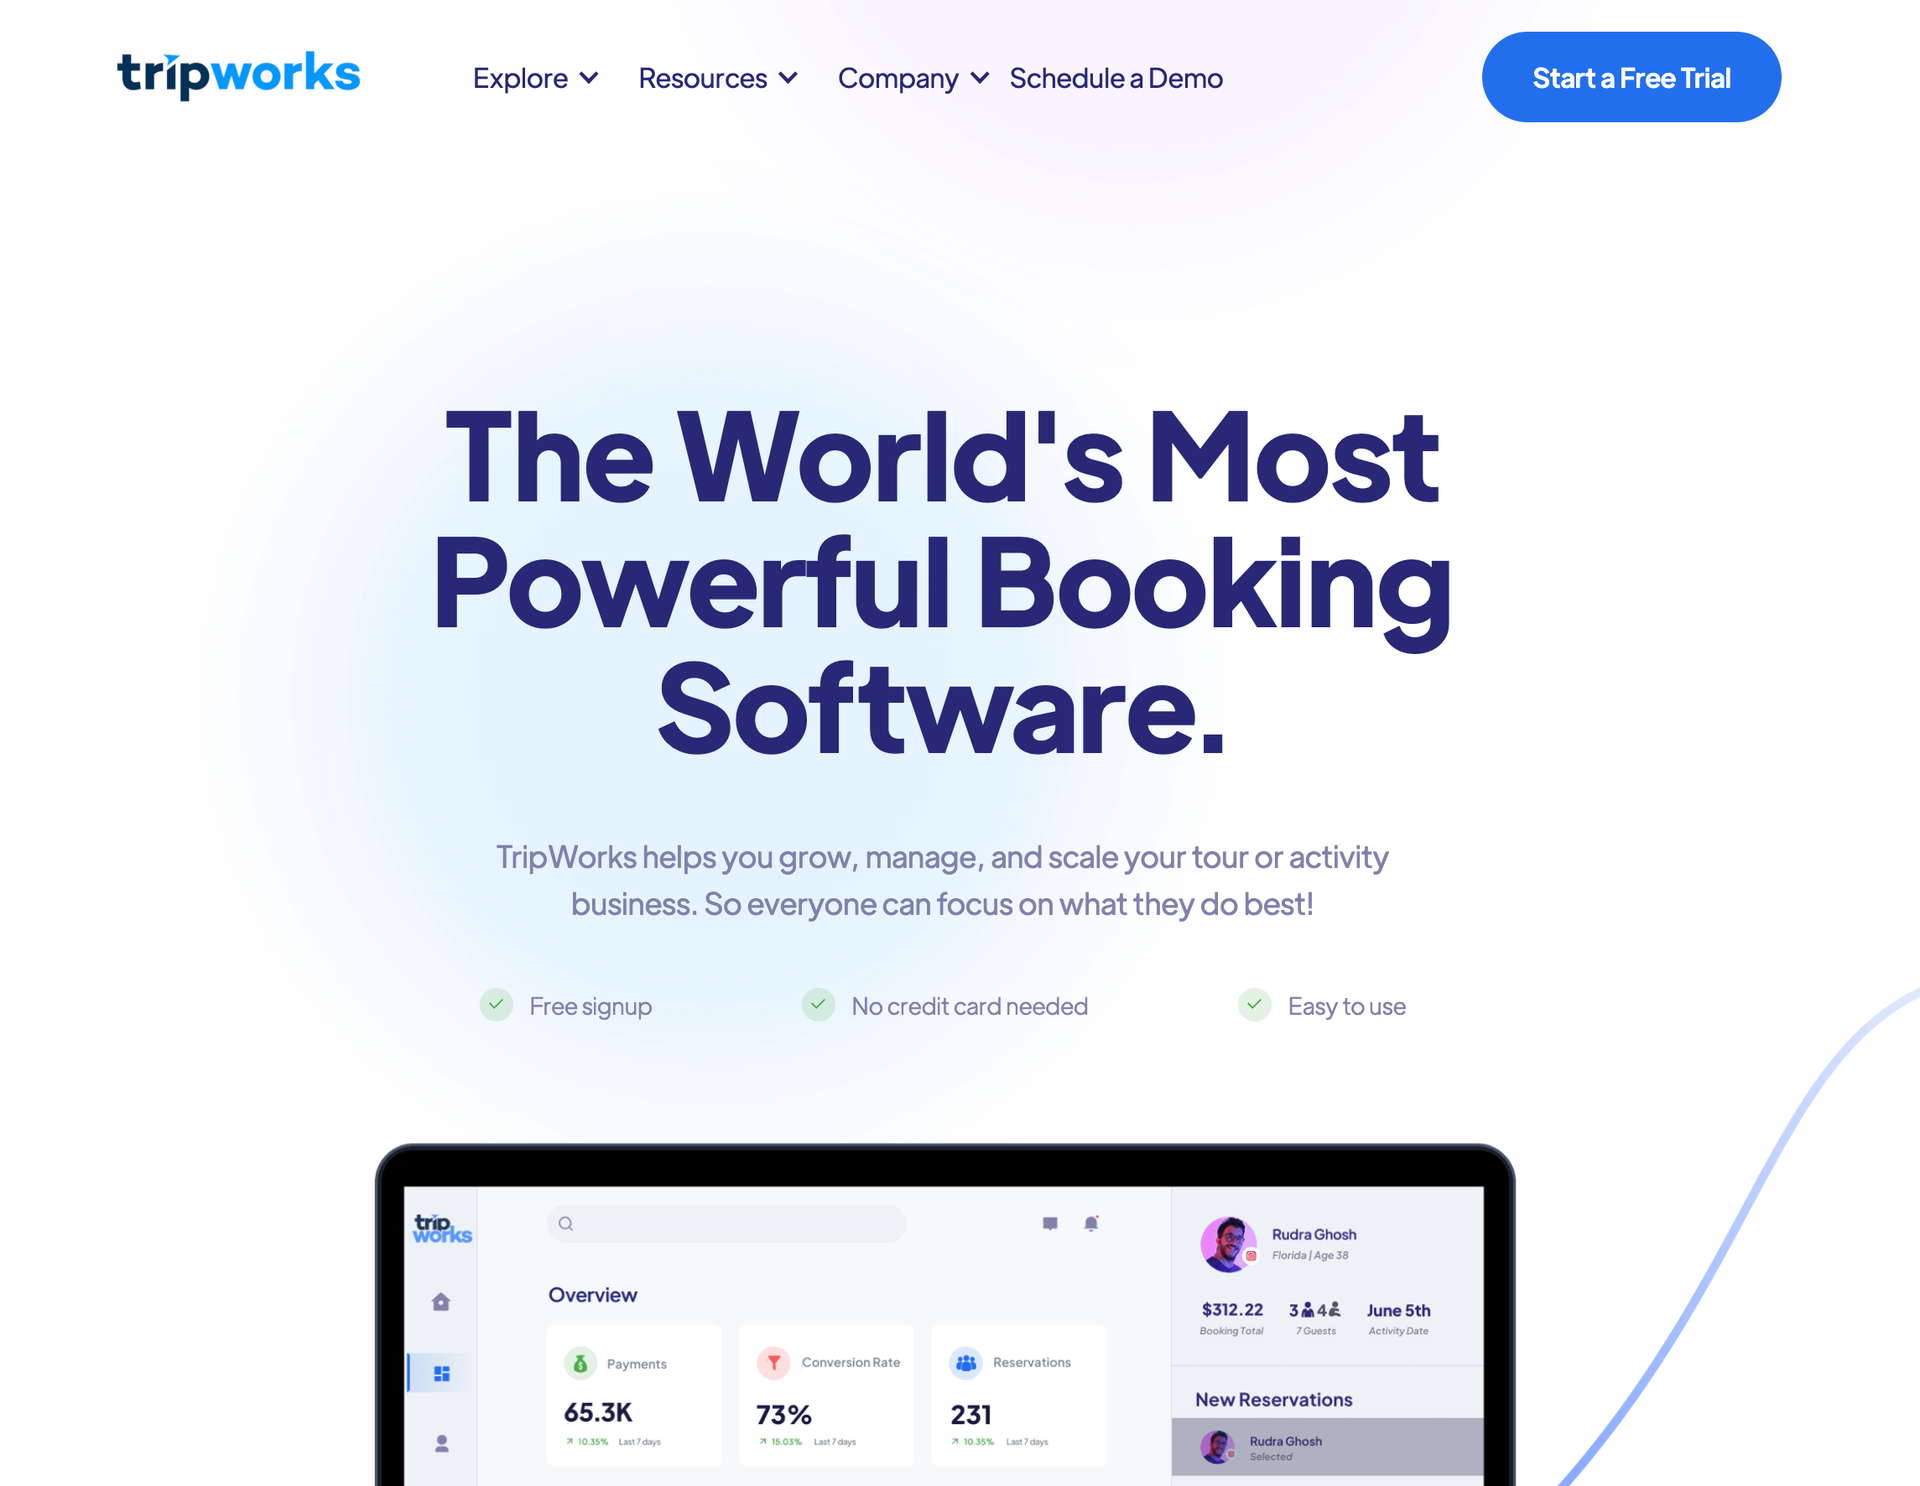 TripWorks homepage: The World's Most Powerful Booking Software.